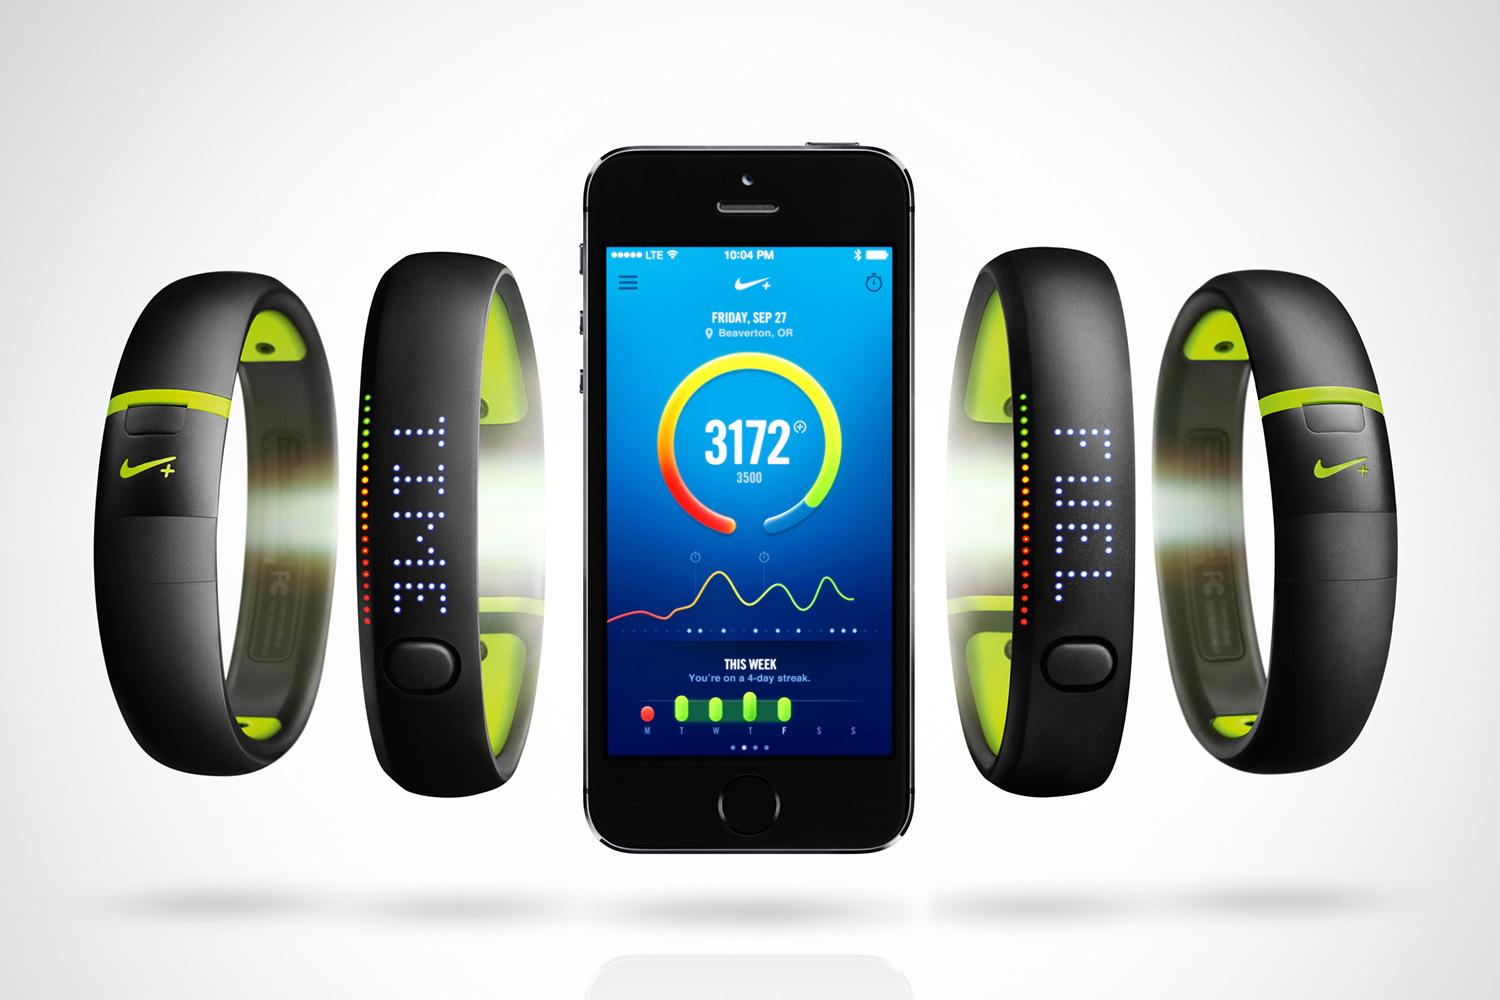 Report: Nike kills off the FuelBand, fires most of hardware team | Digital Trends